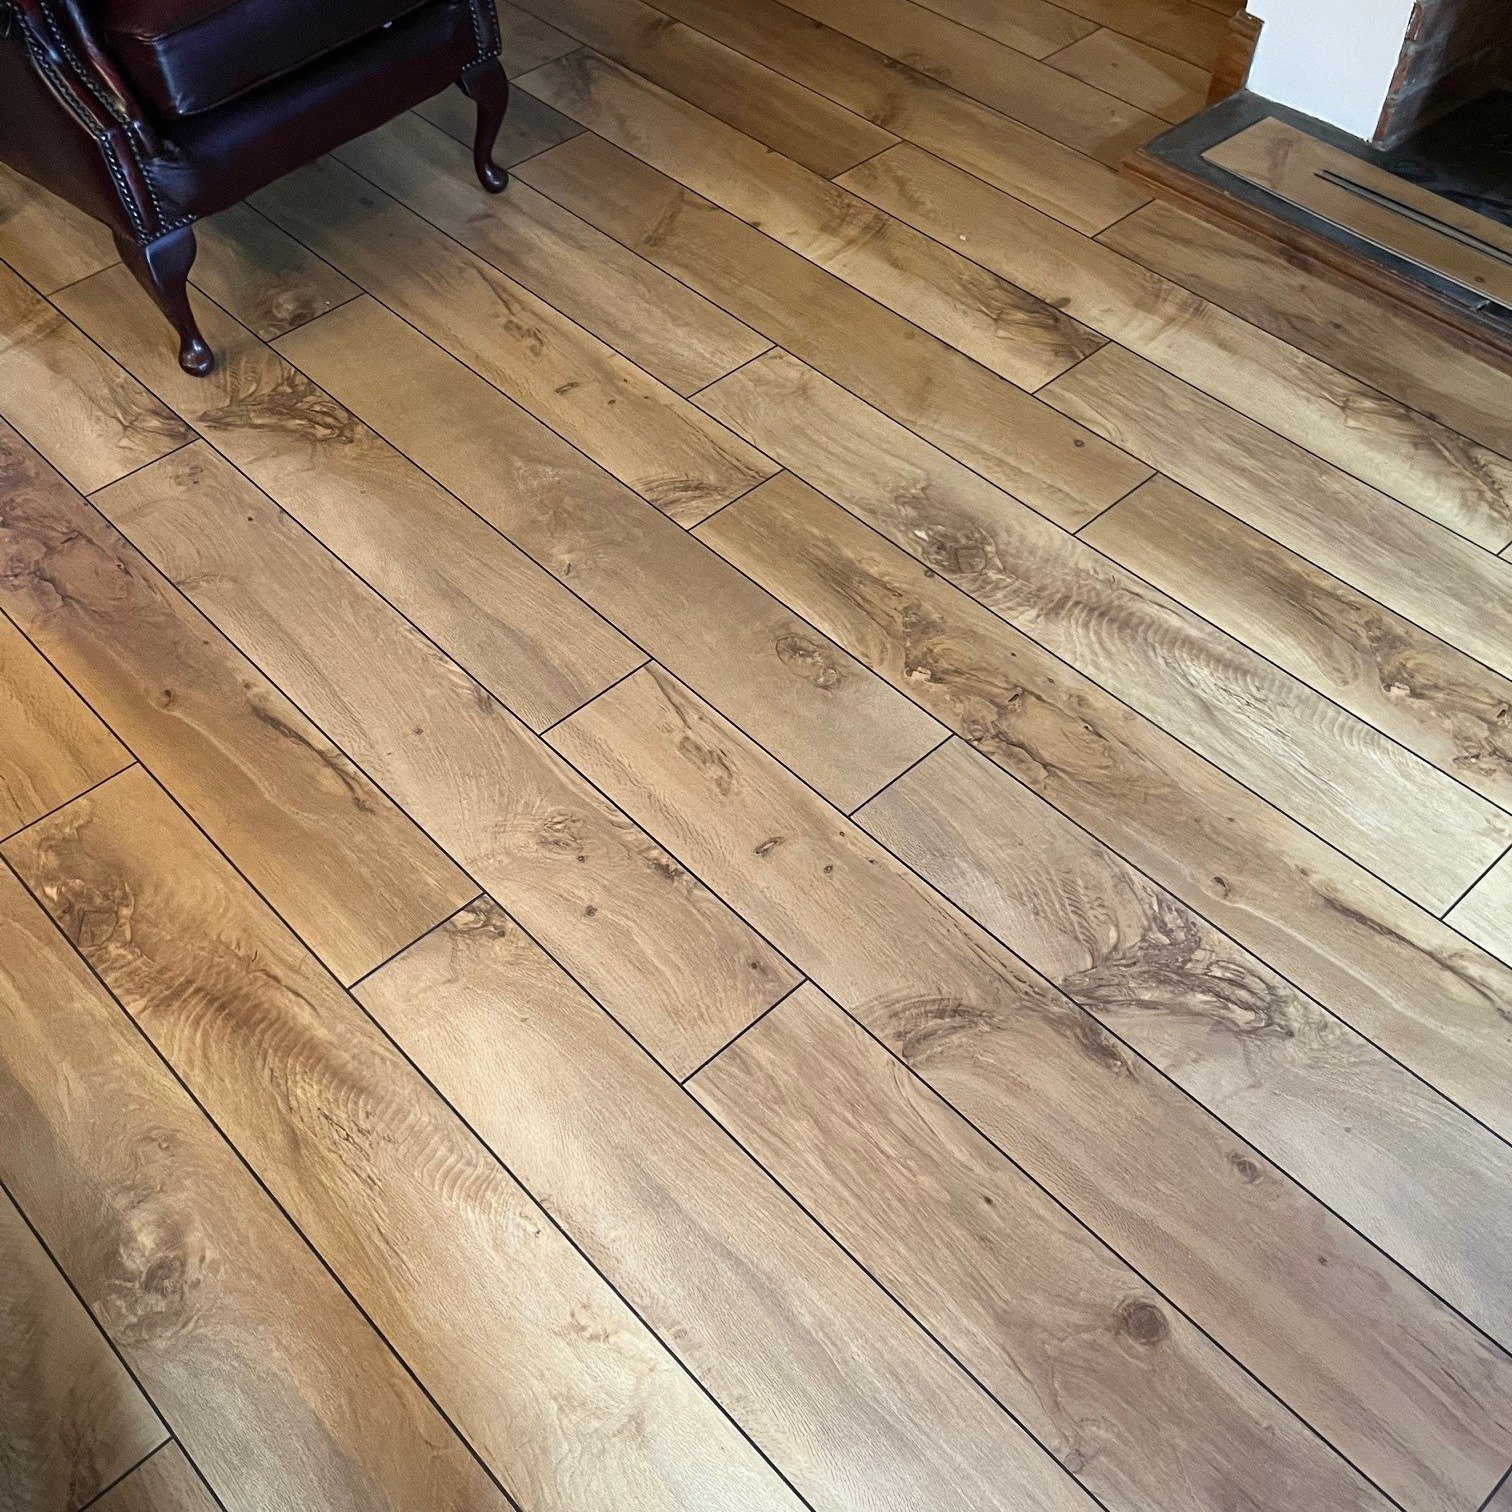 📸 Van Gogh - Auckland Oak VGW52T

Auckland Oak from @karndean_uk  Van Gogh wood collection has a classic honey oak colour with distinctive authentic knot details for a classic and versatile oak look.

Fitted by us in a Ships Decking effect, using th